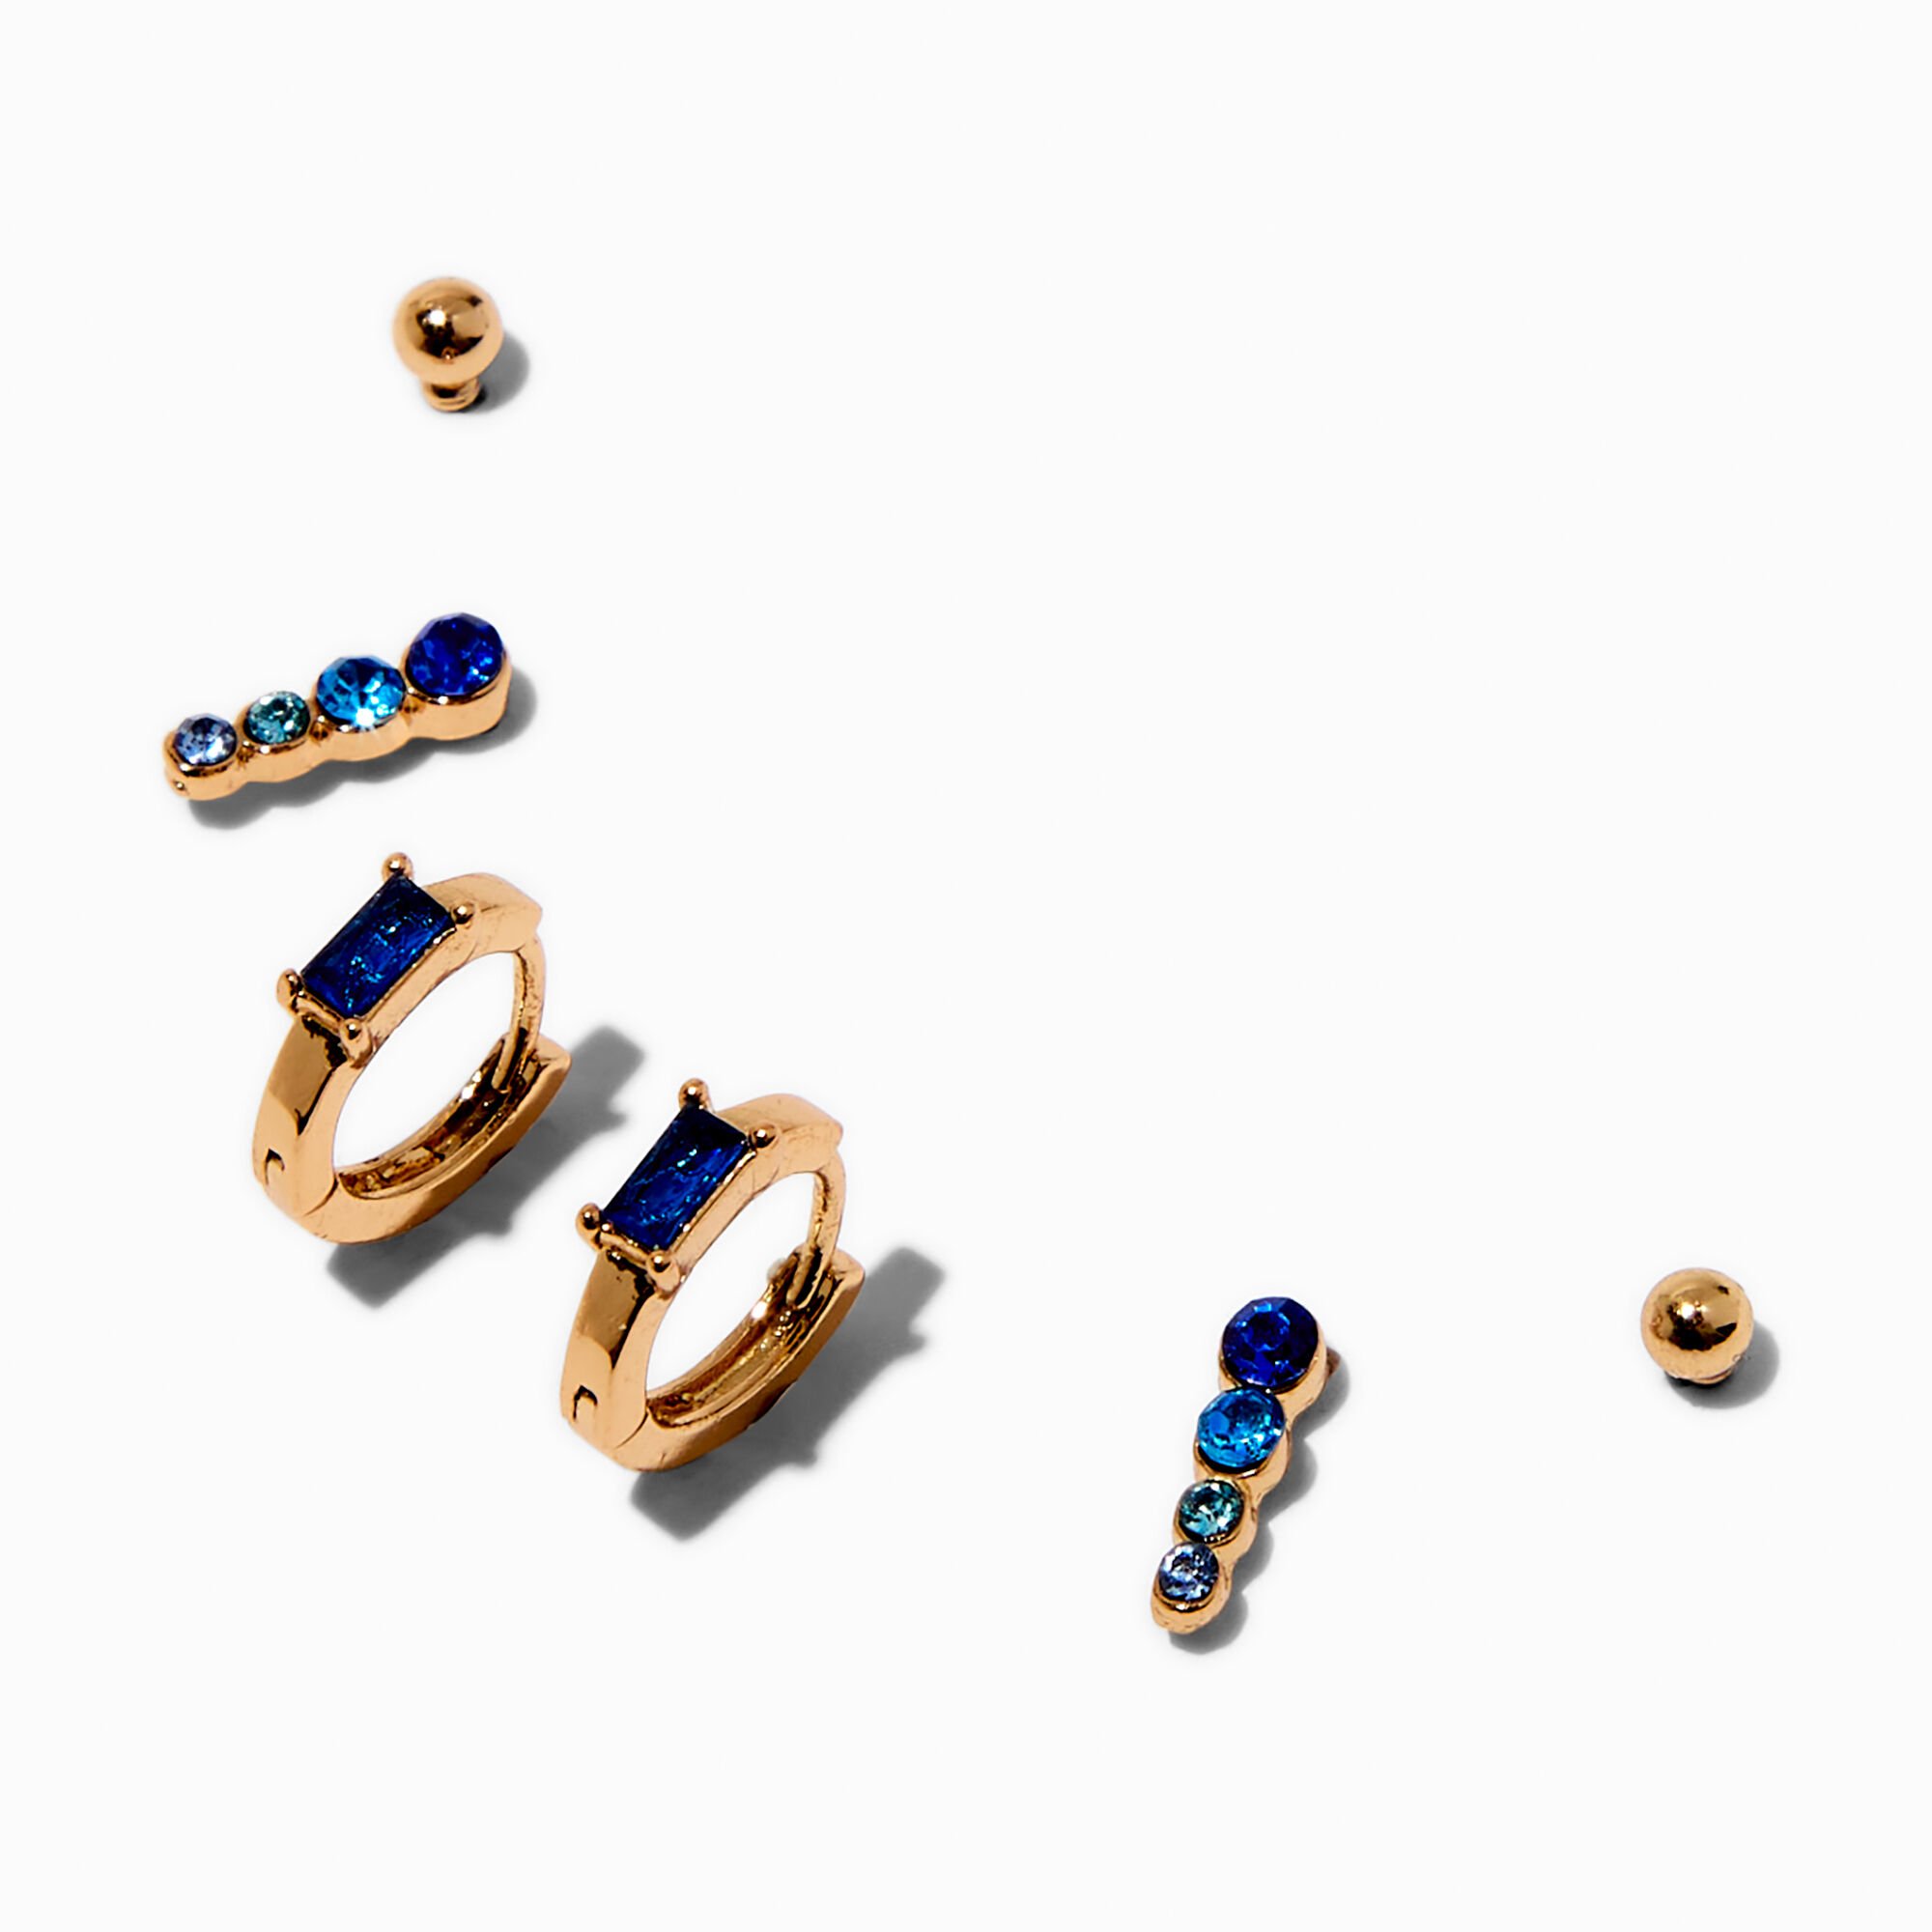 View Claires GoldTone Cubic Zirconia Earring Stackables Set 3 Pack Blue information